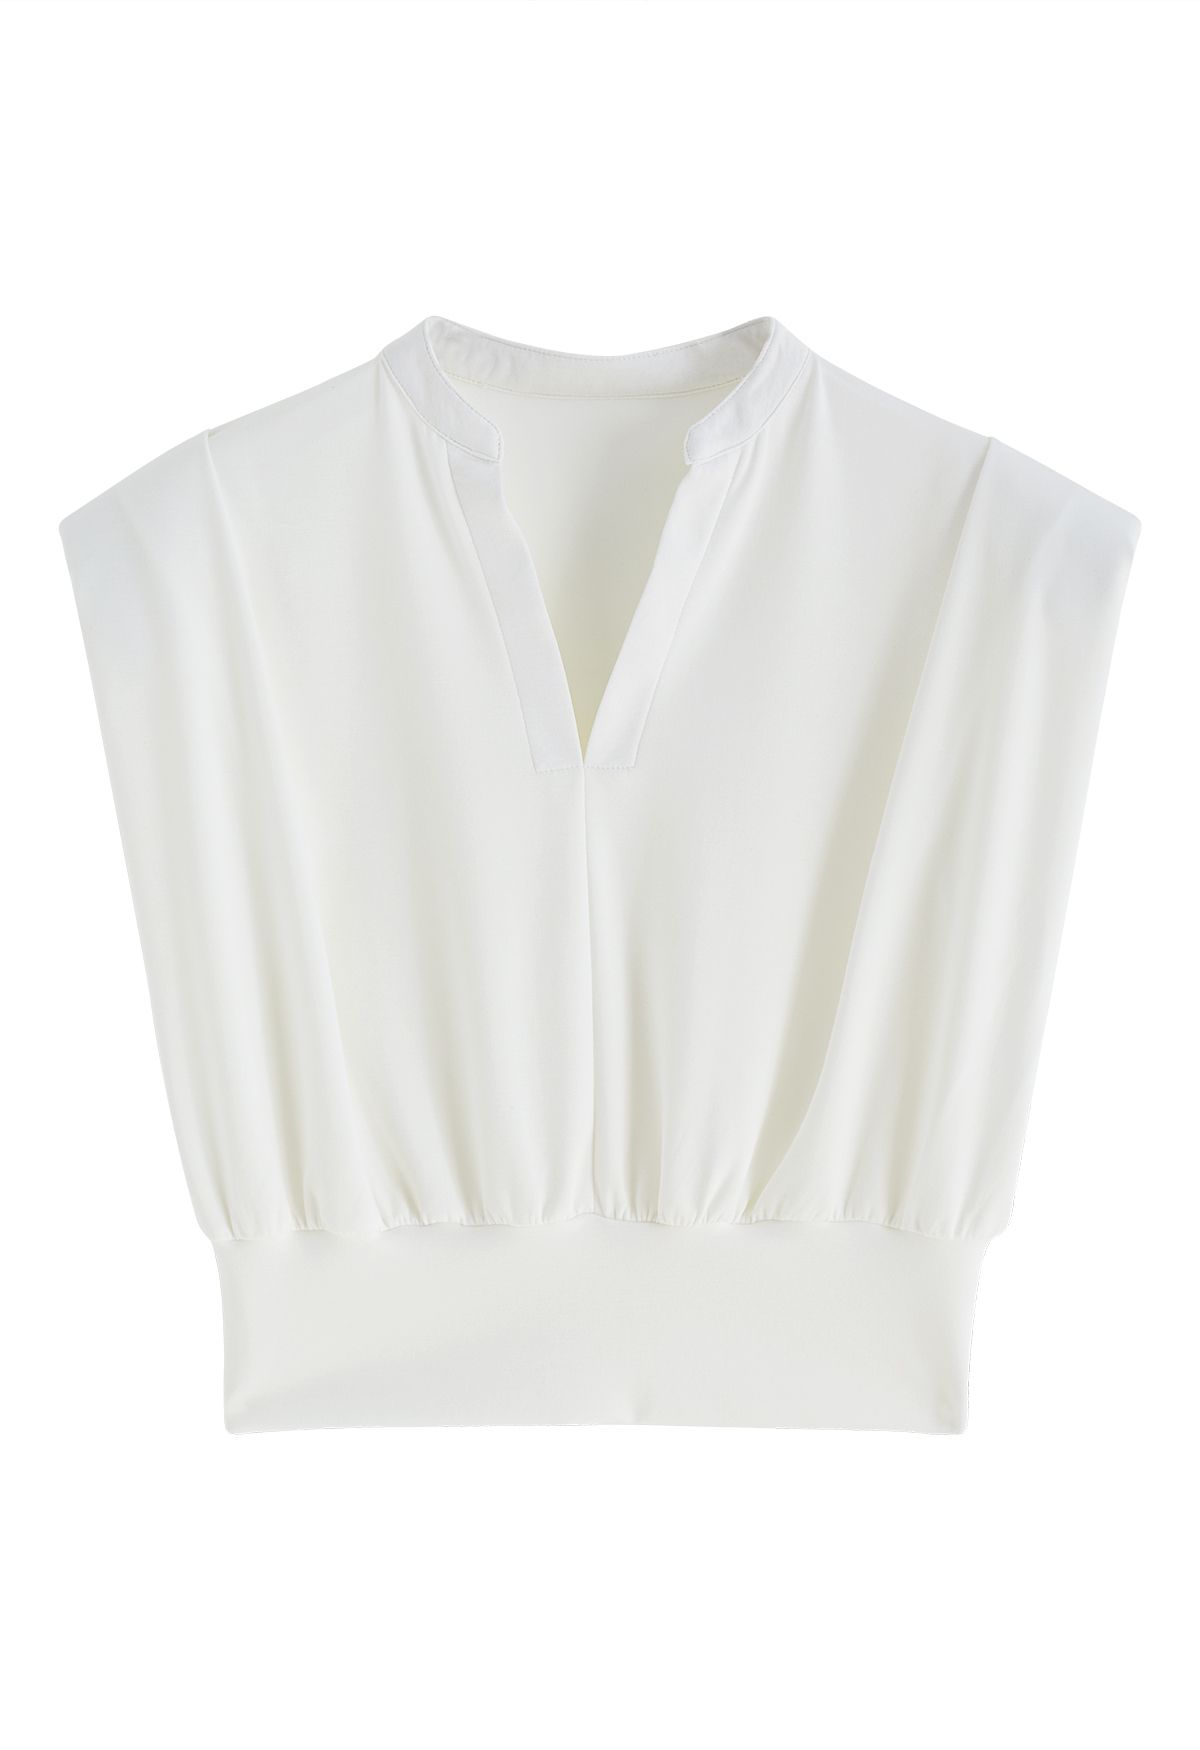 Padded Shoulder V-Neck Sleeveless Top in White - Retro, Indie and ...